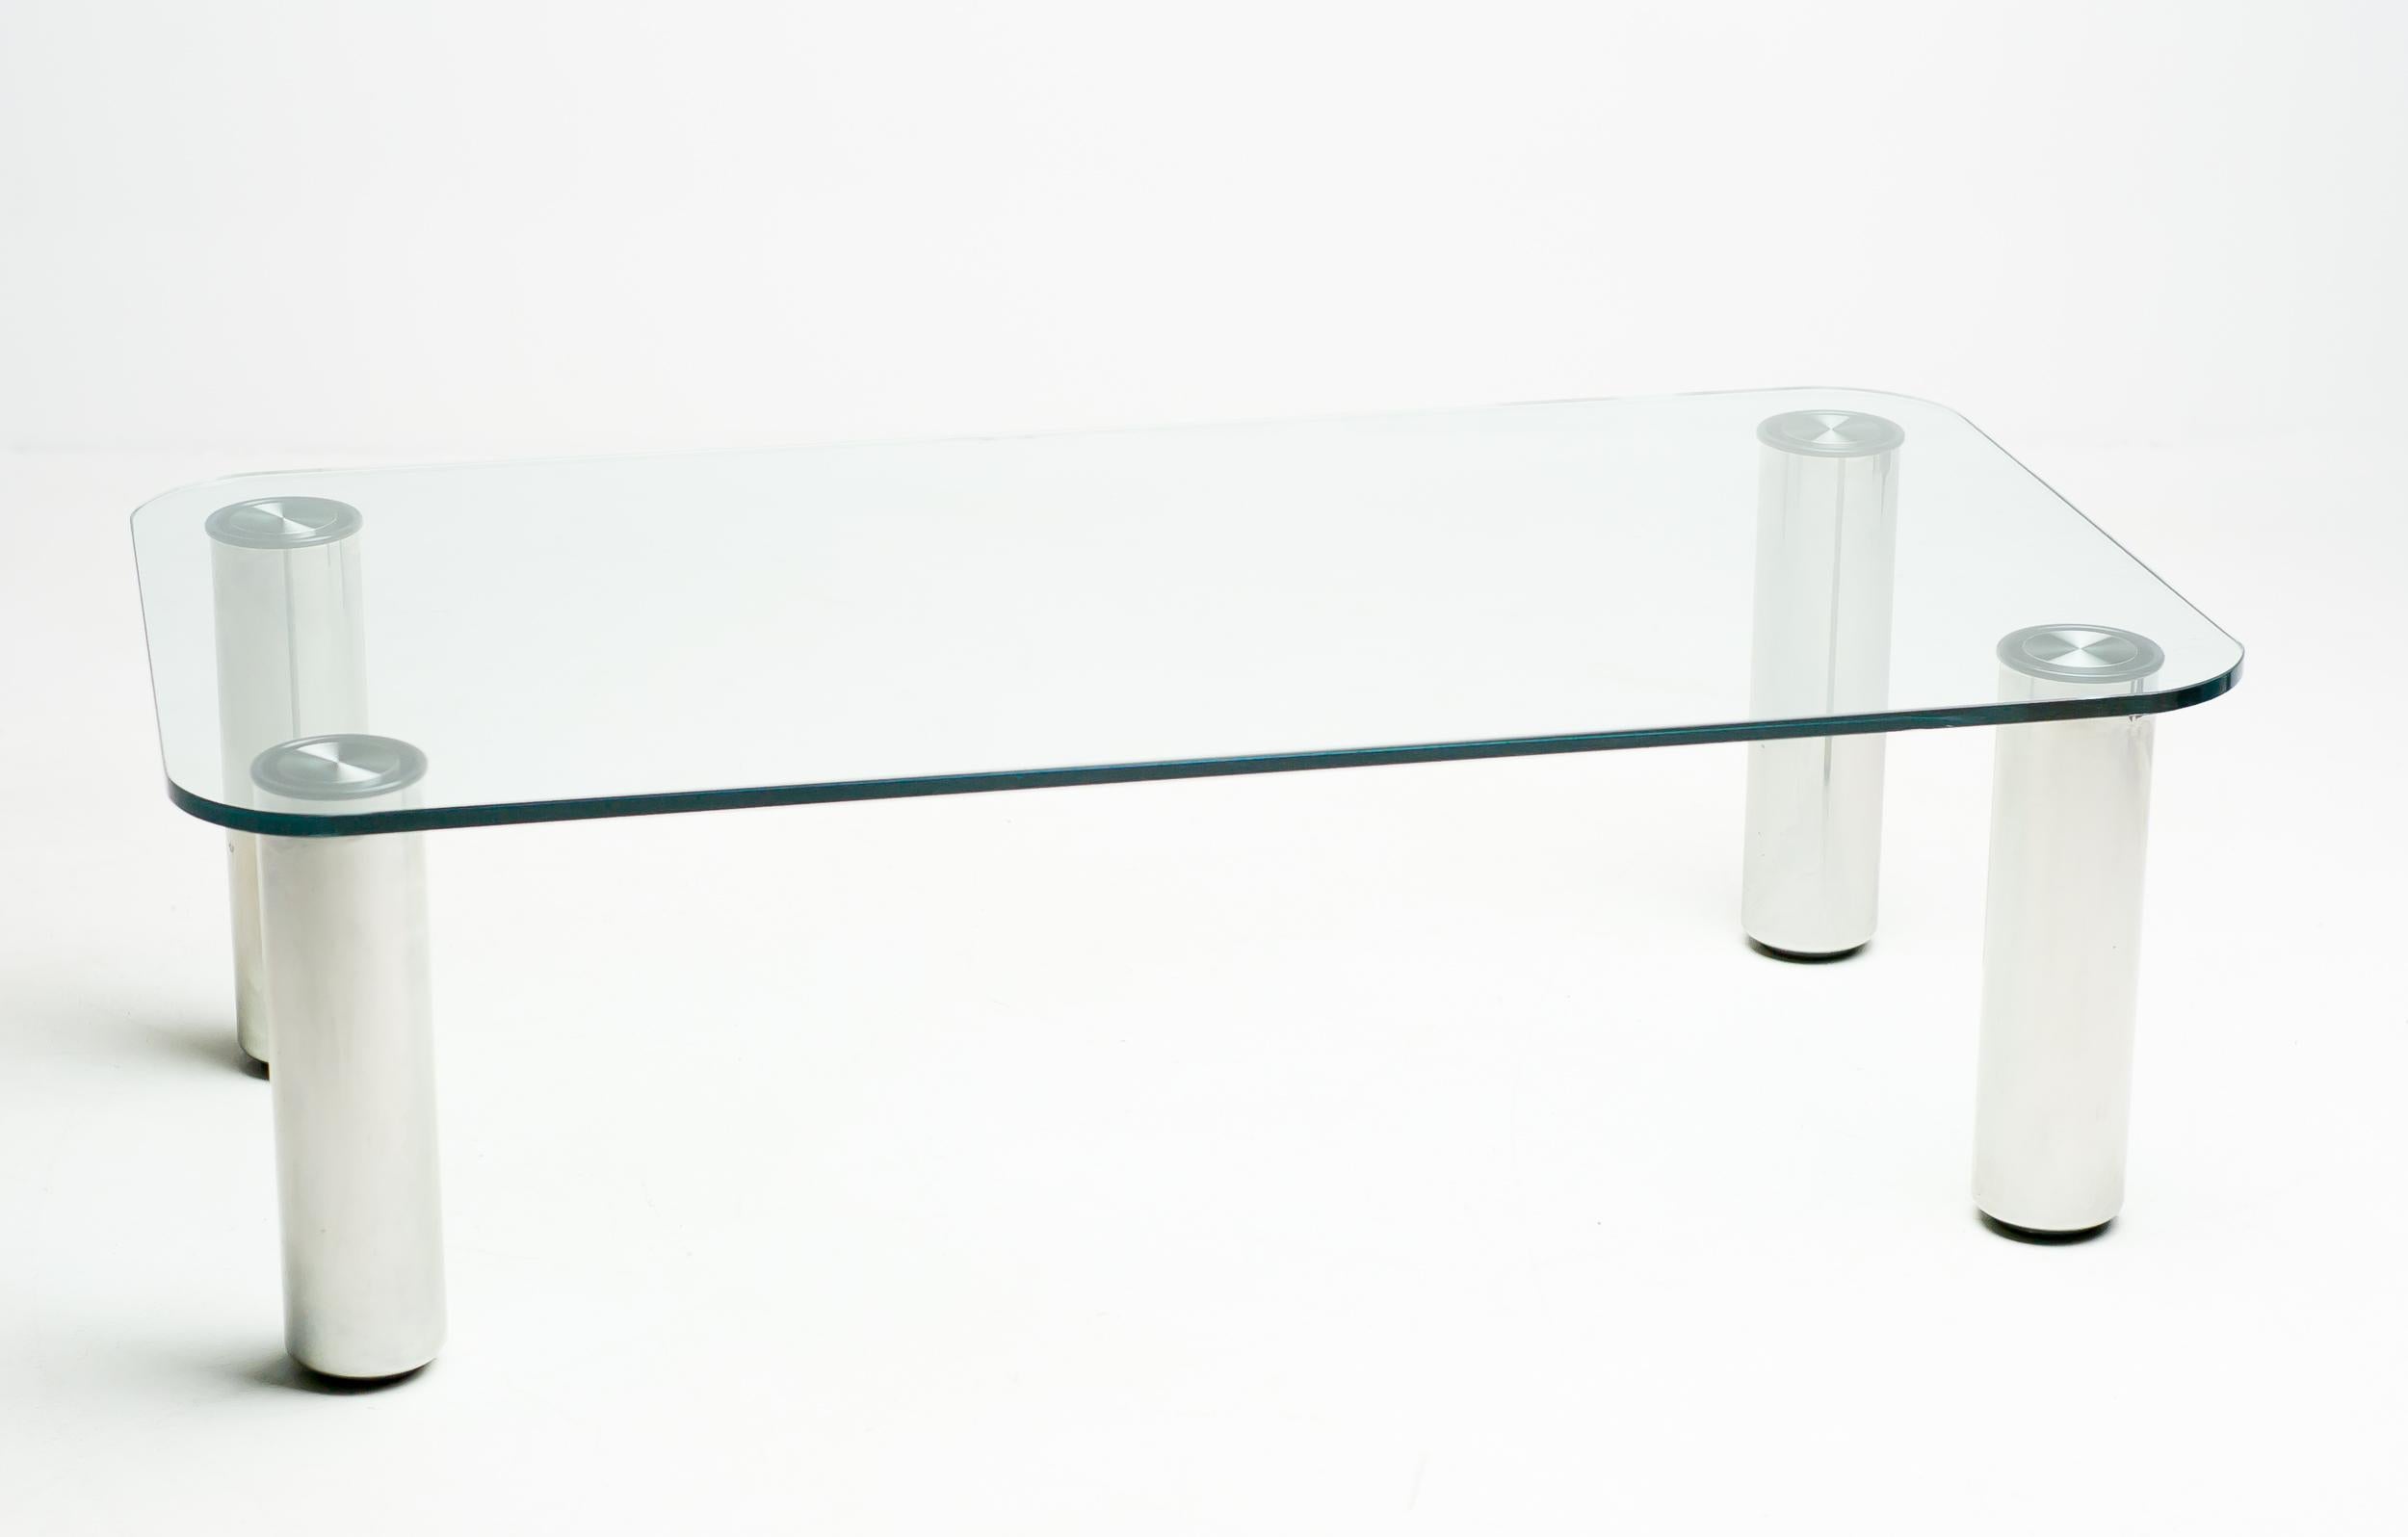 Glass coffee table designed by Marco Zanuso with glass top and detachable stainless steel legs.